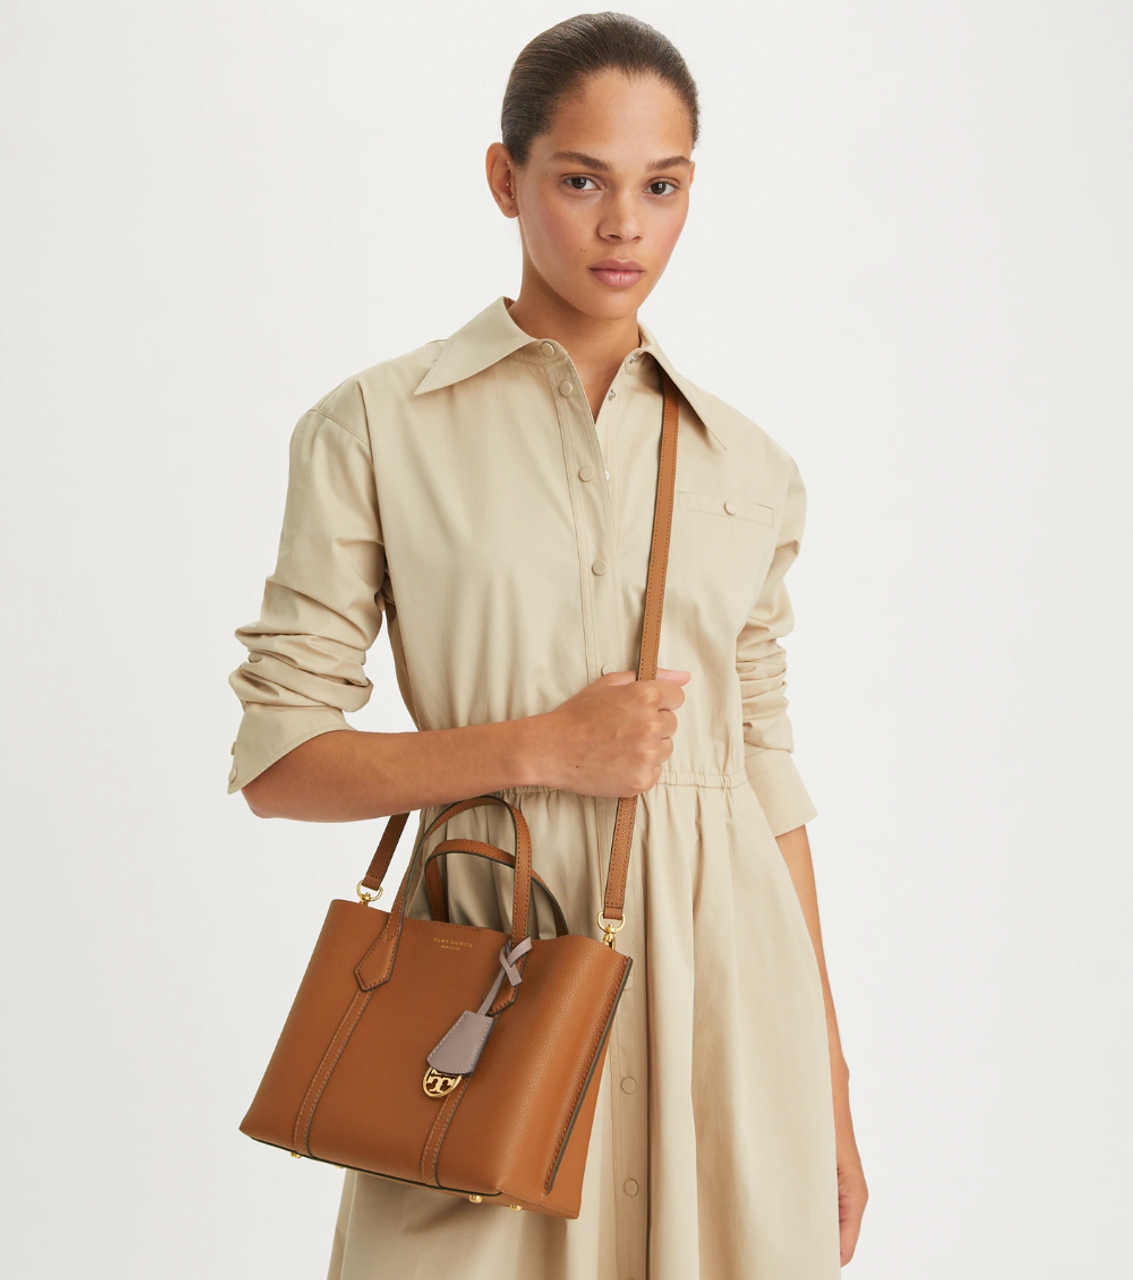 Tory Burch Perry Small Triple-Compartment Tote- Light Umber